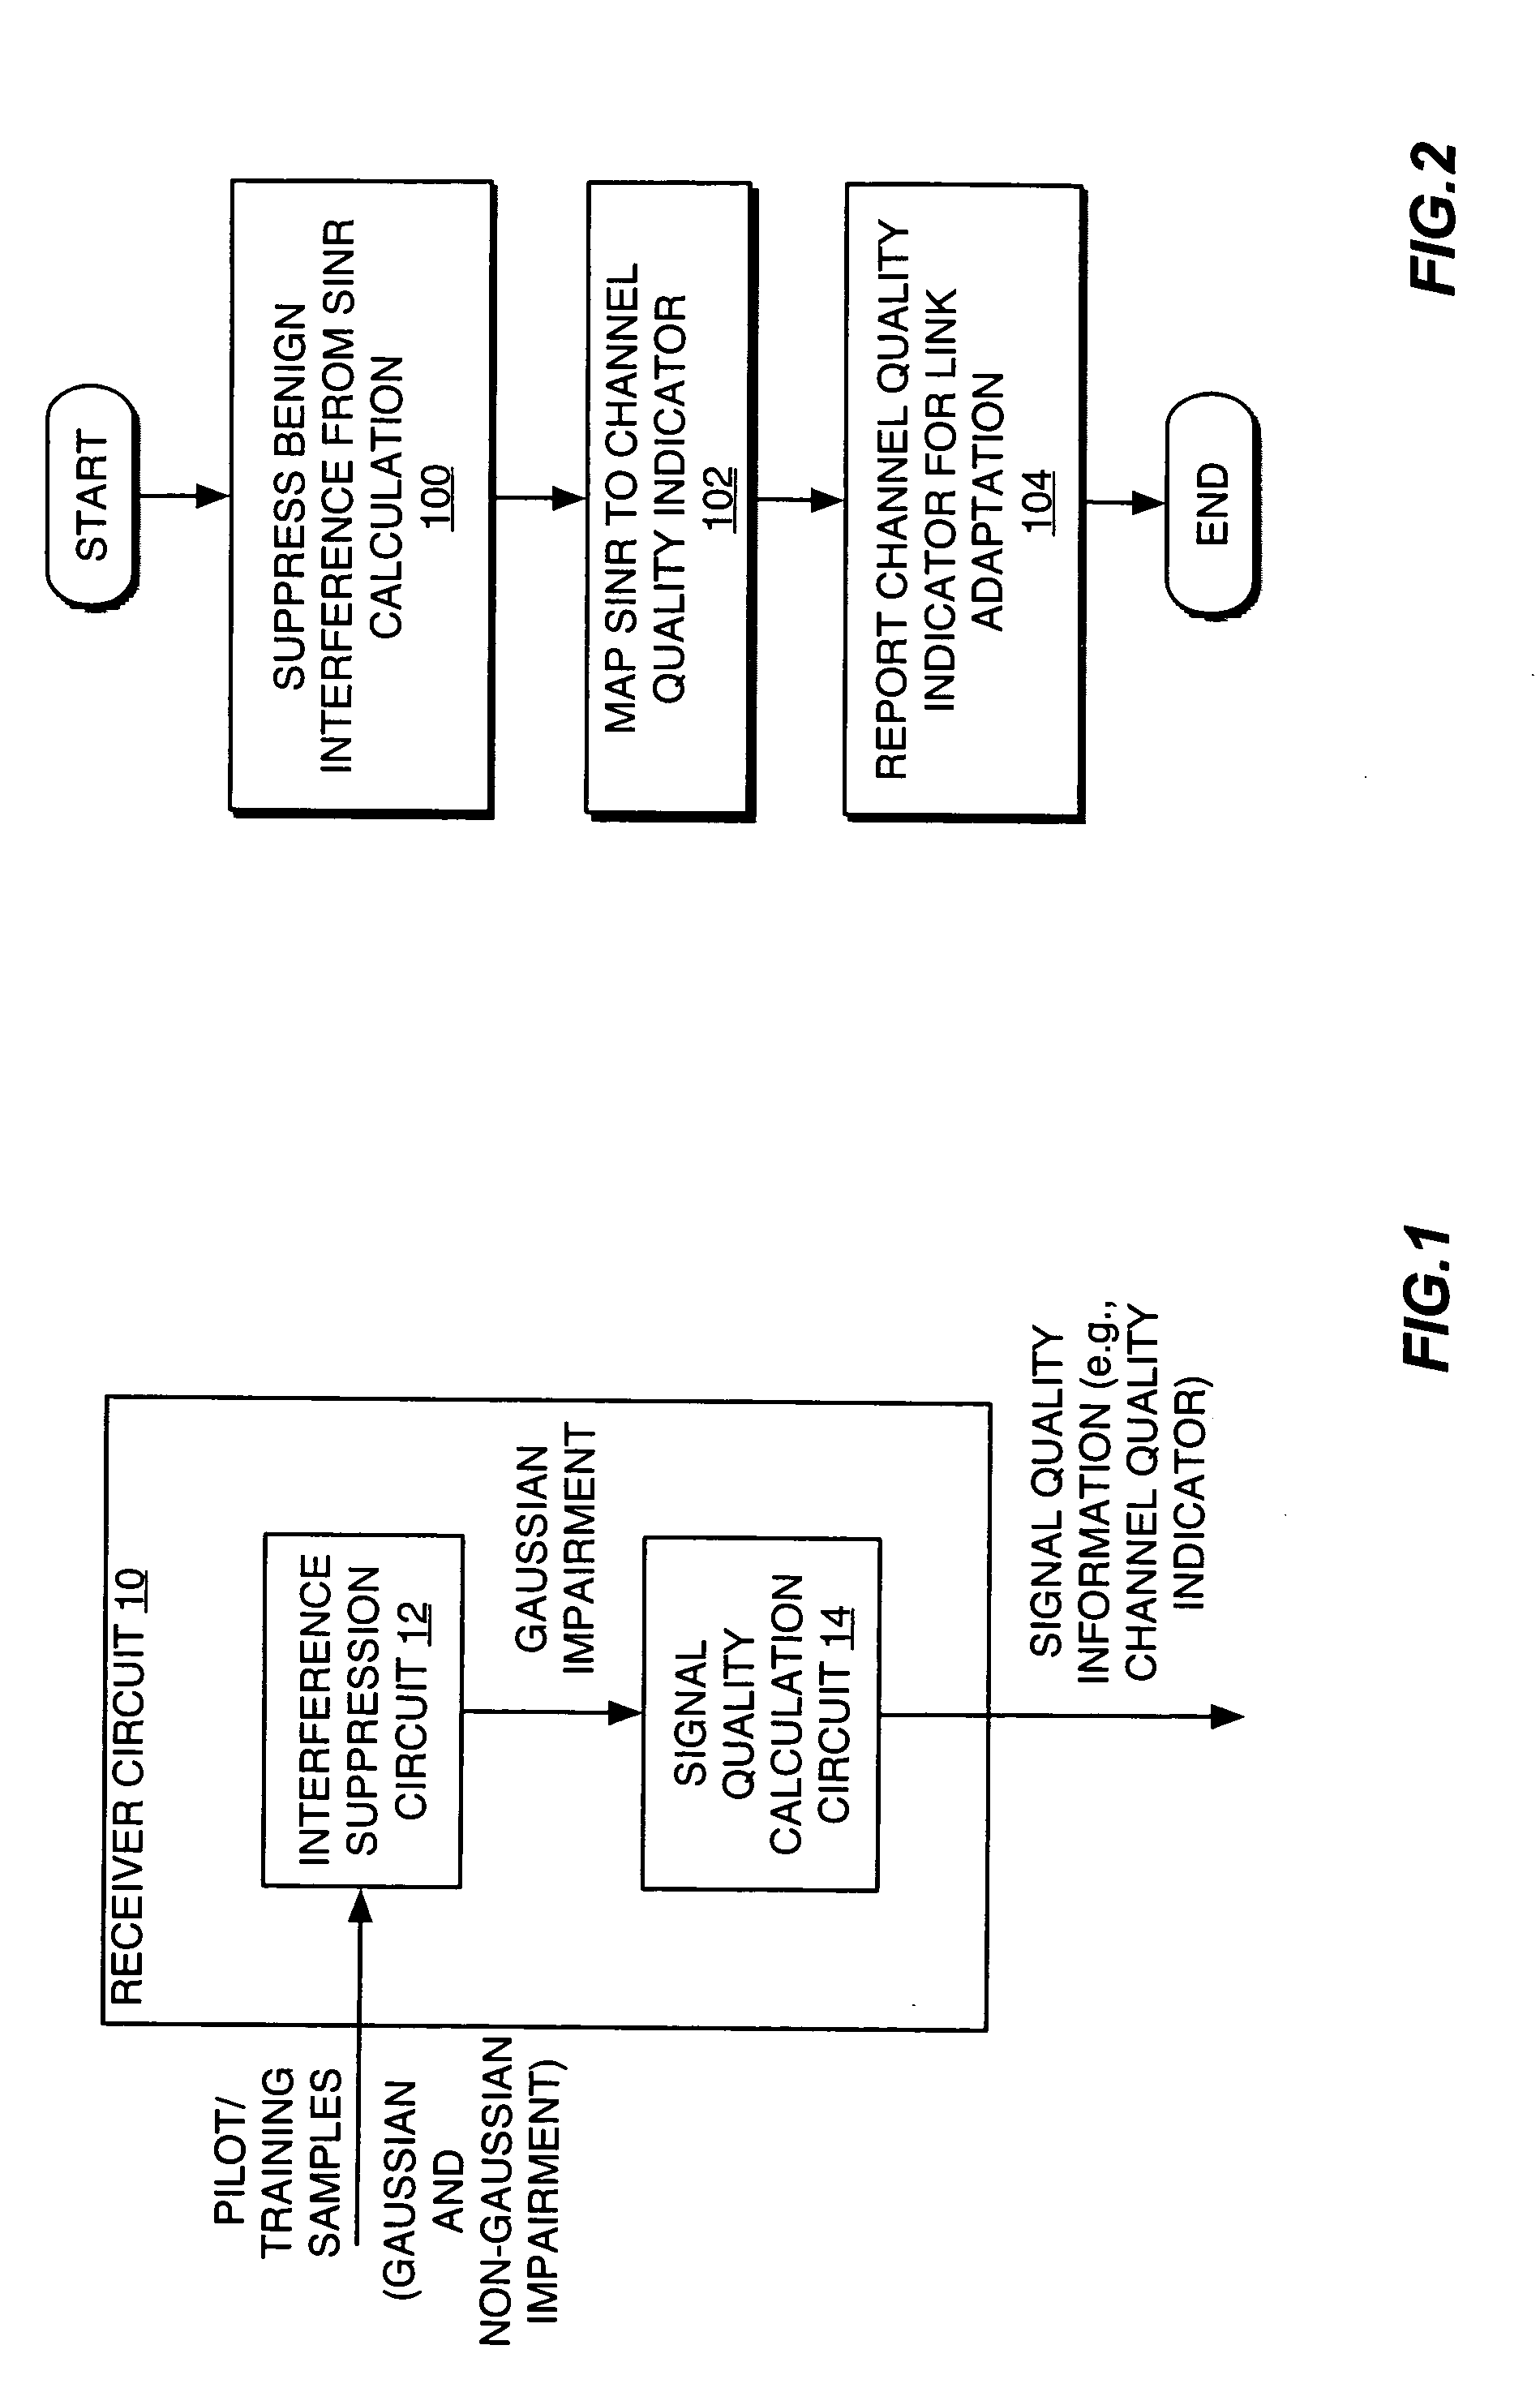 Benign interference suppression for received signal quality estimation